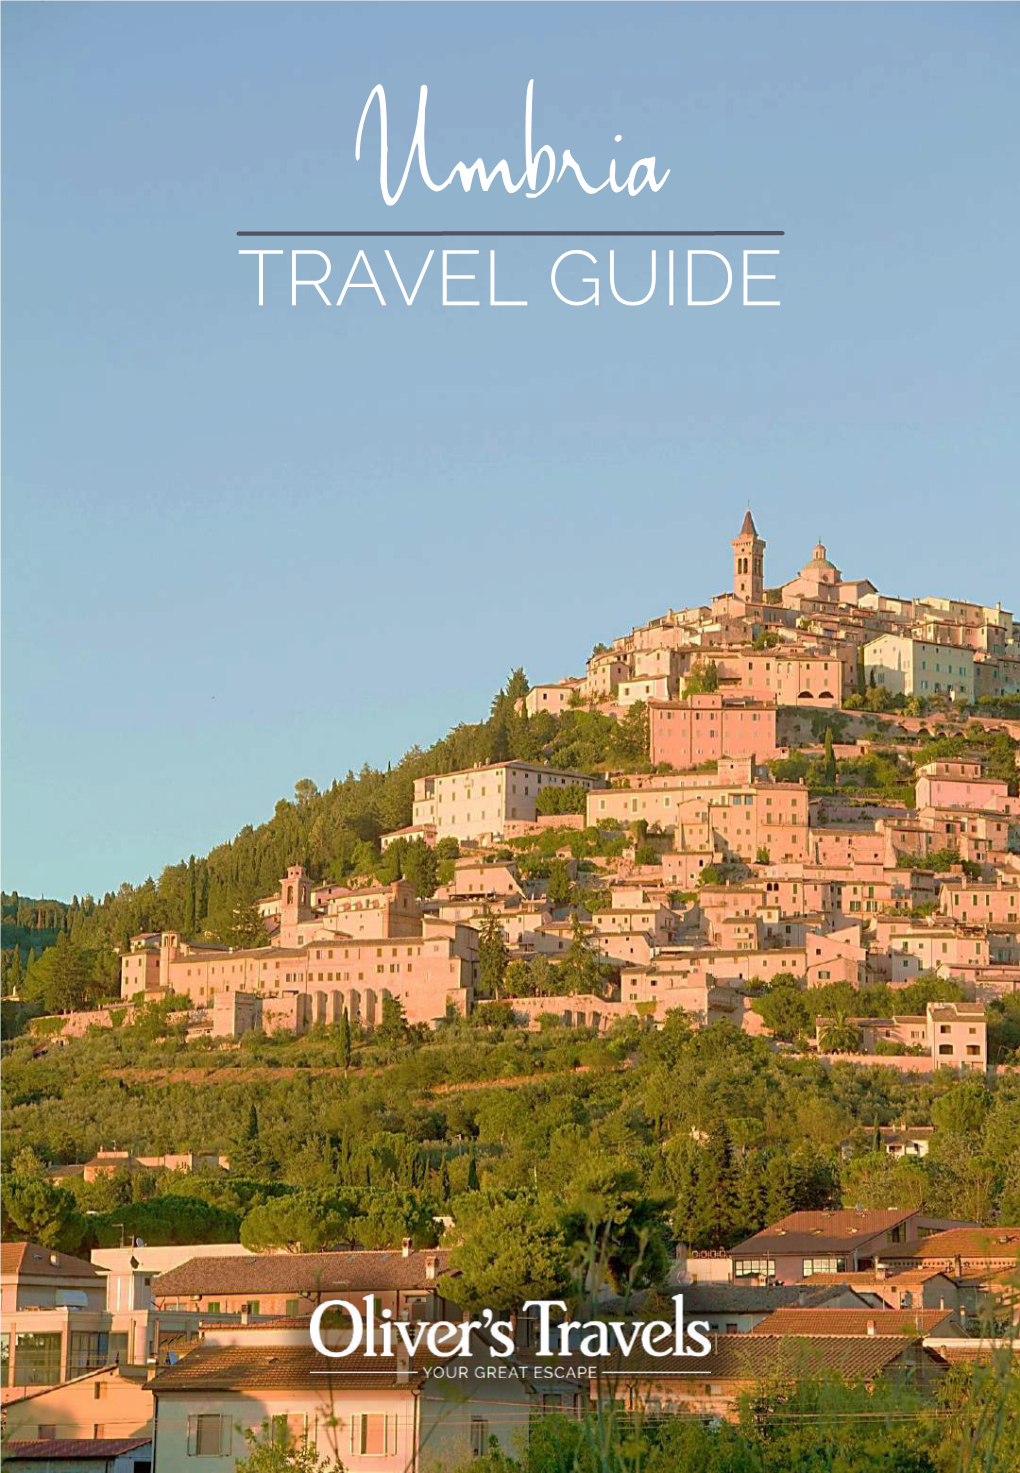 Download Our Umbria Travel Guide